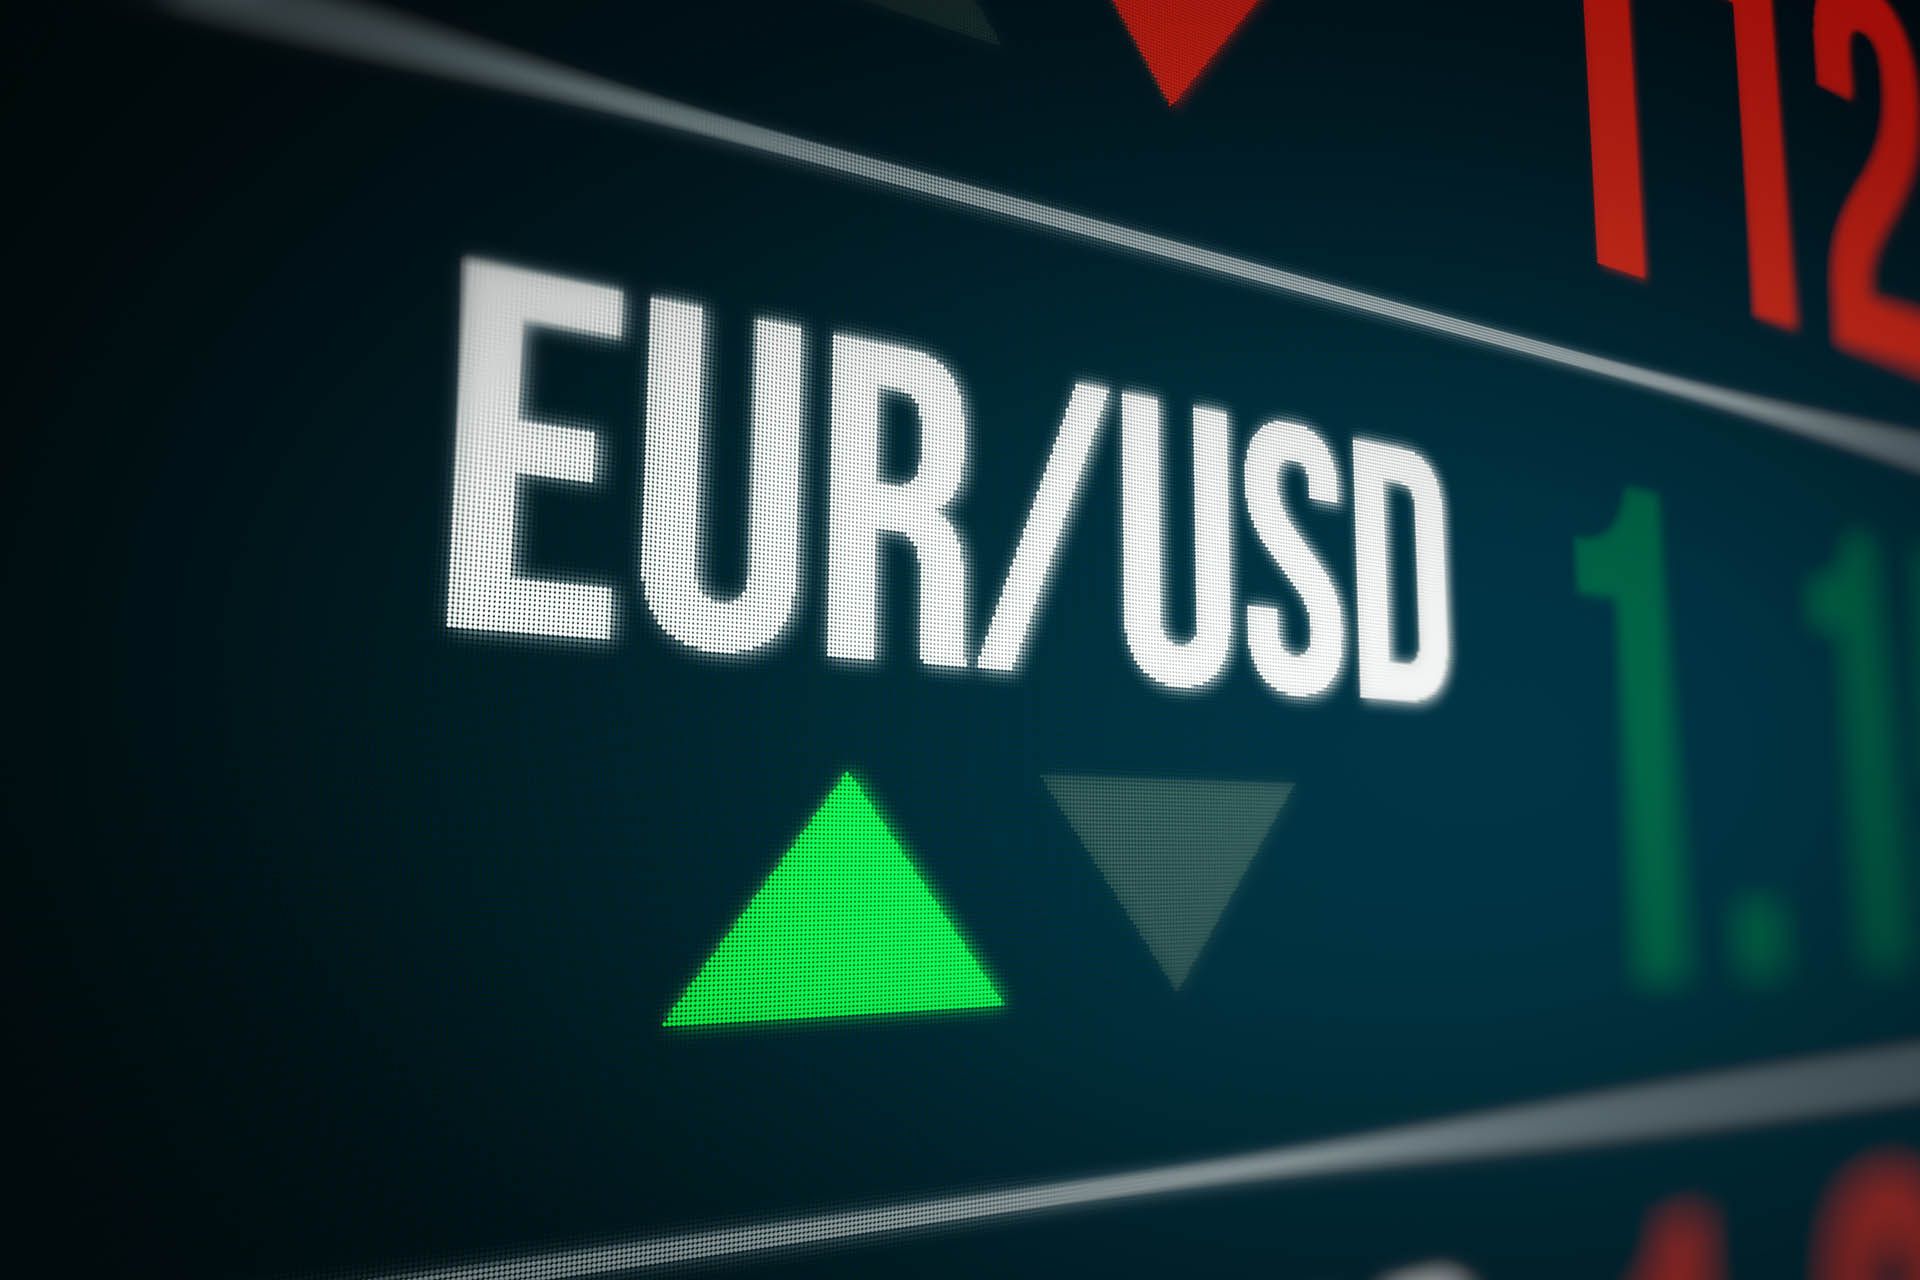 EUR/USD will reverse trend this week